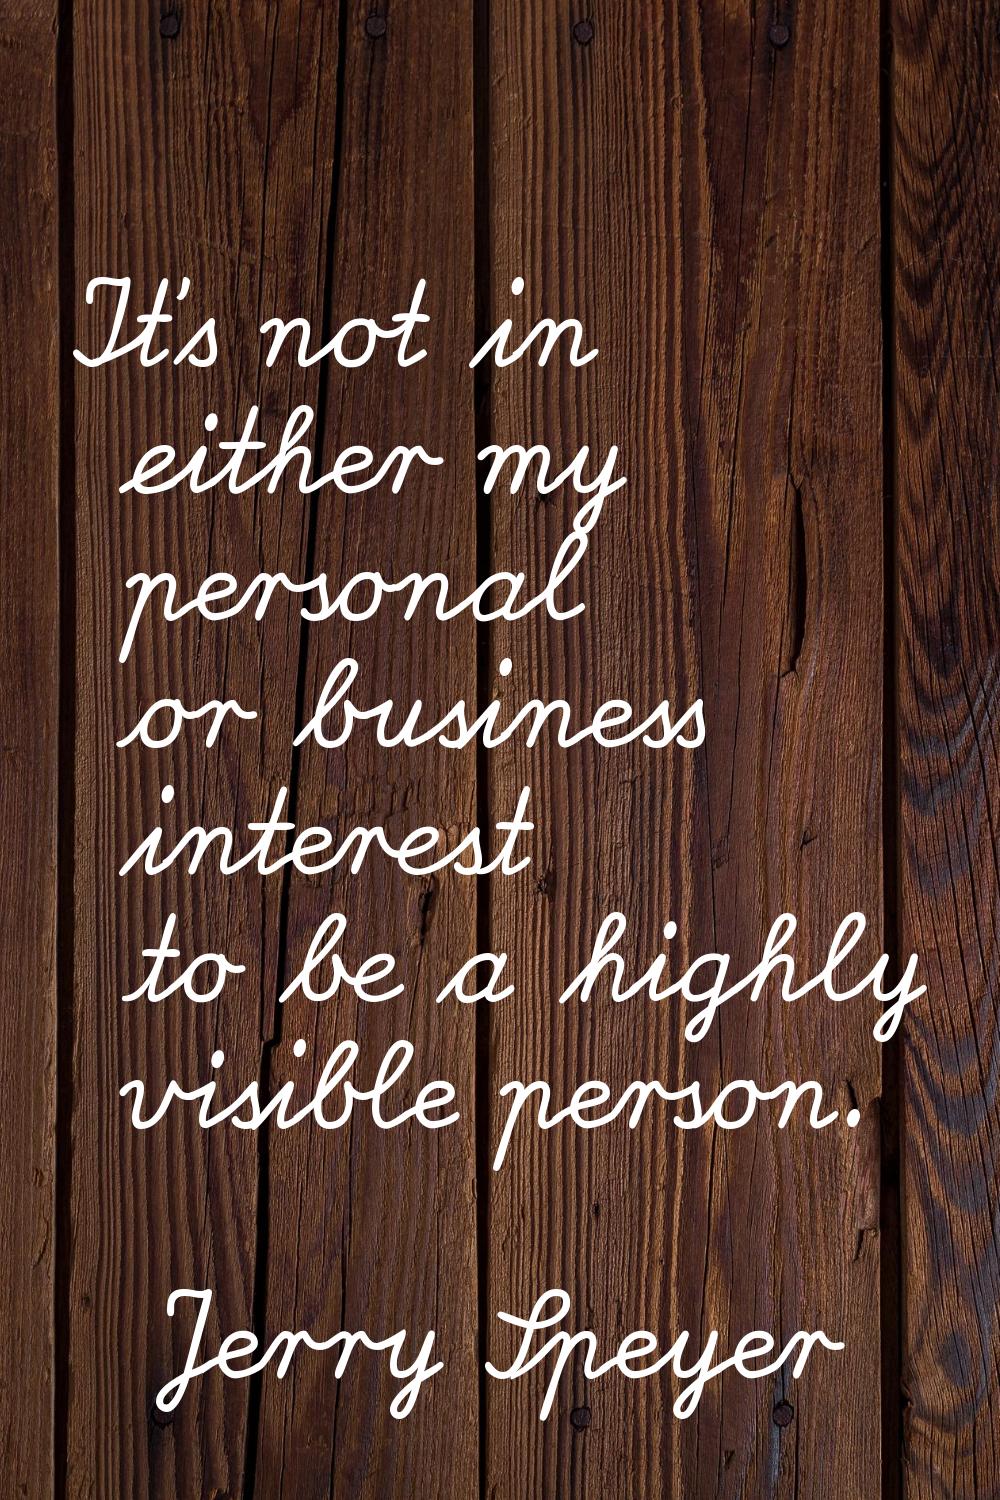 It's not in either my personal or business interest to be a highly visible person.